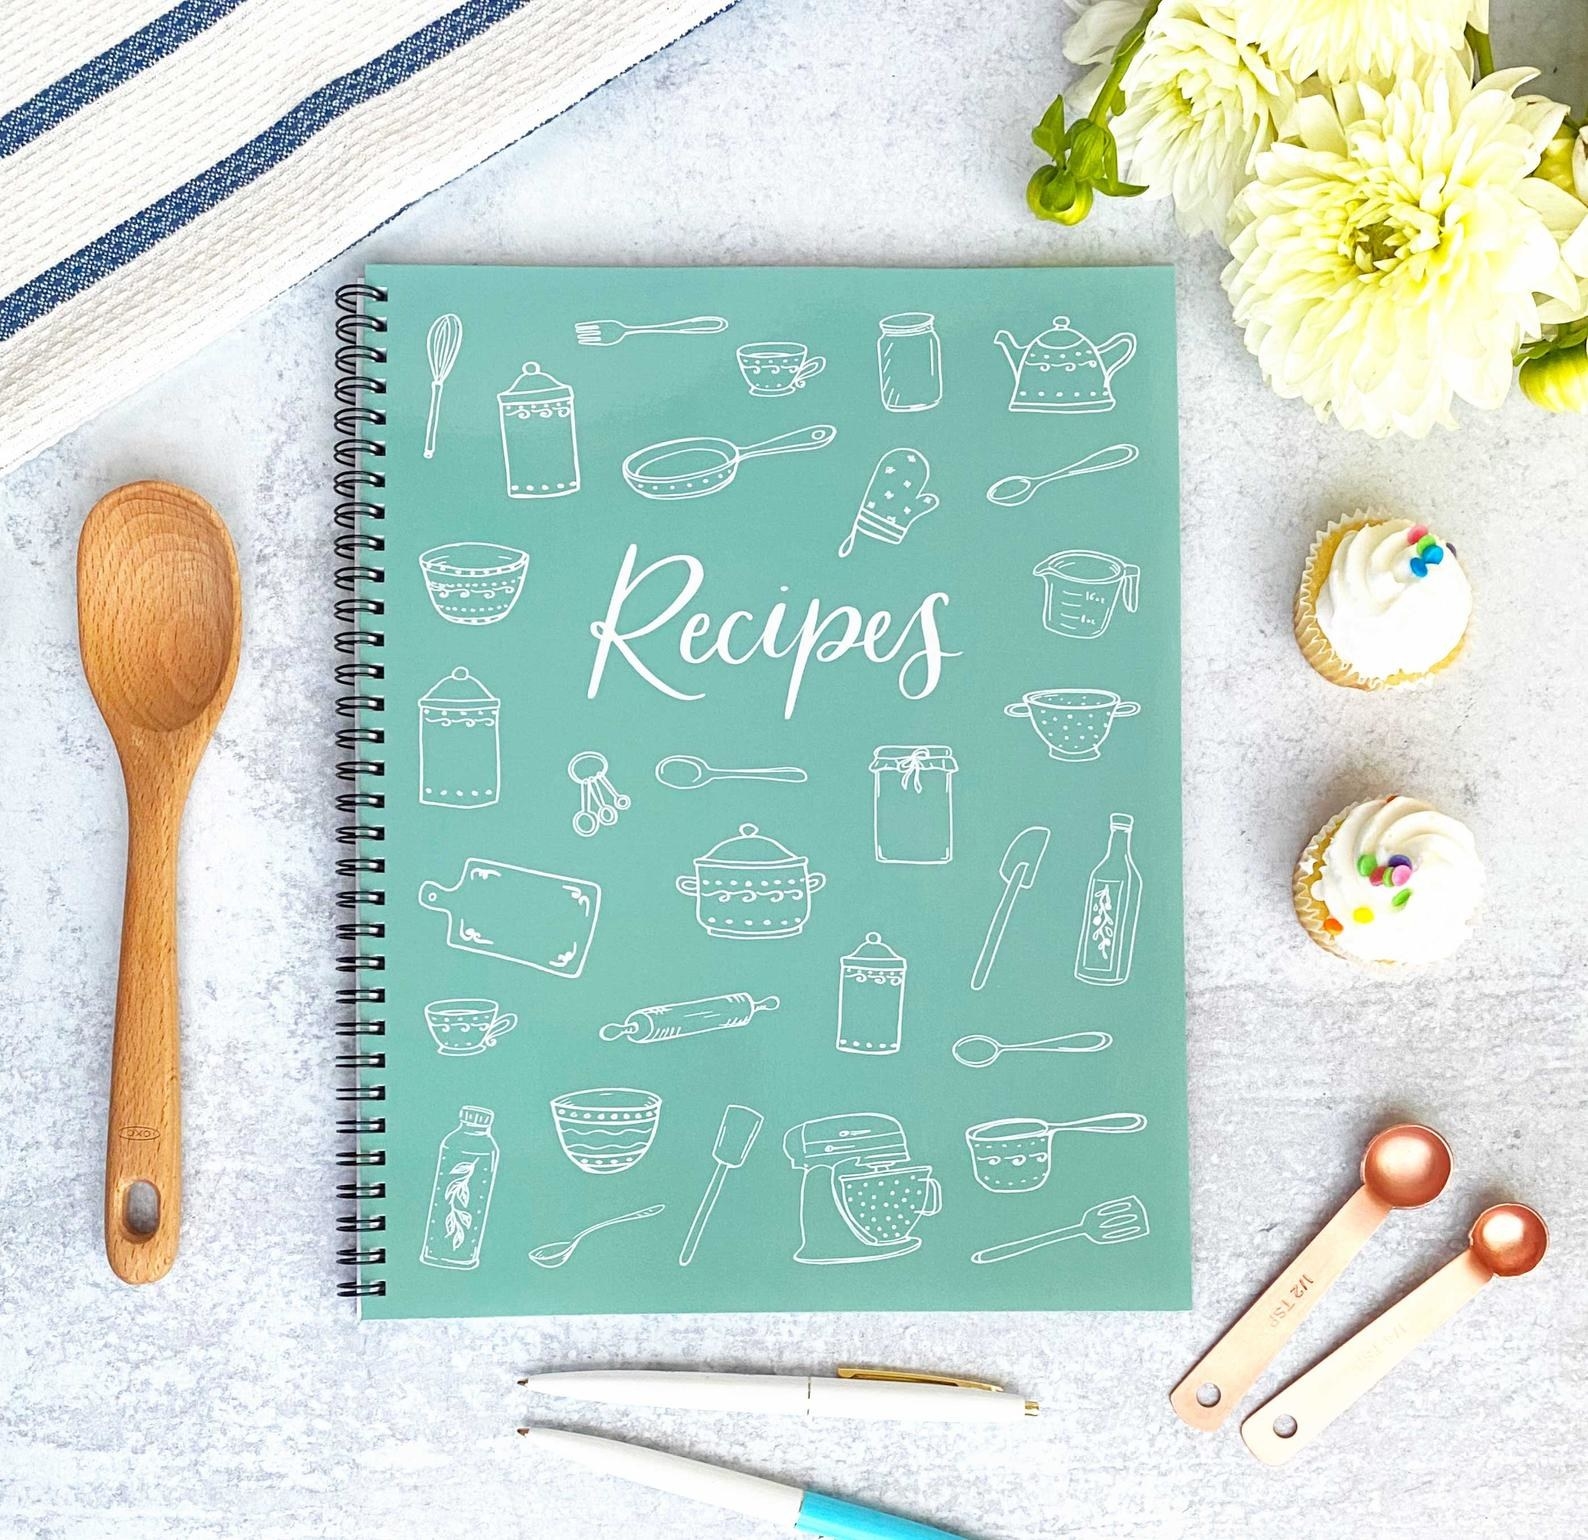 The spiral book in turquoise with illustrations of kitchen items on the cover